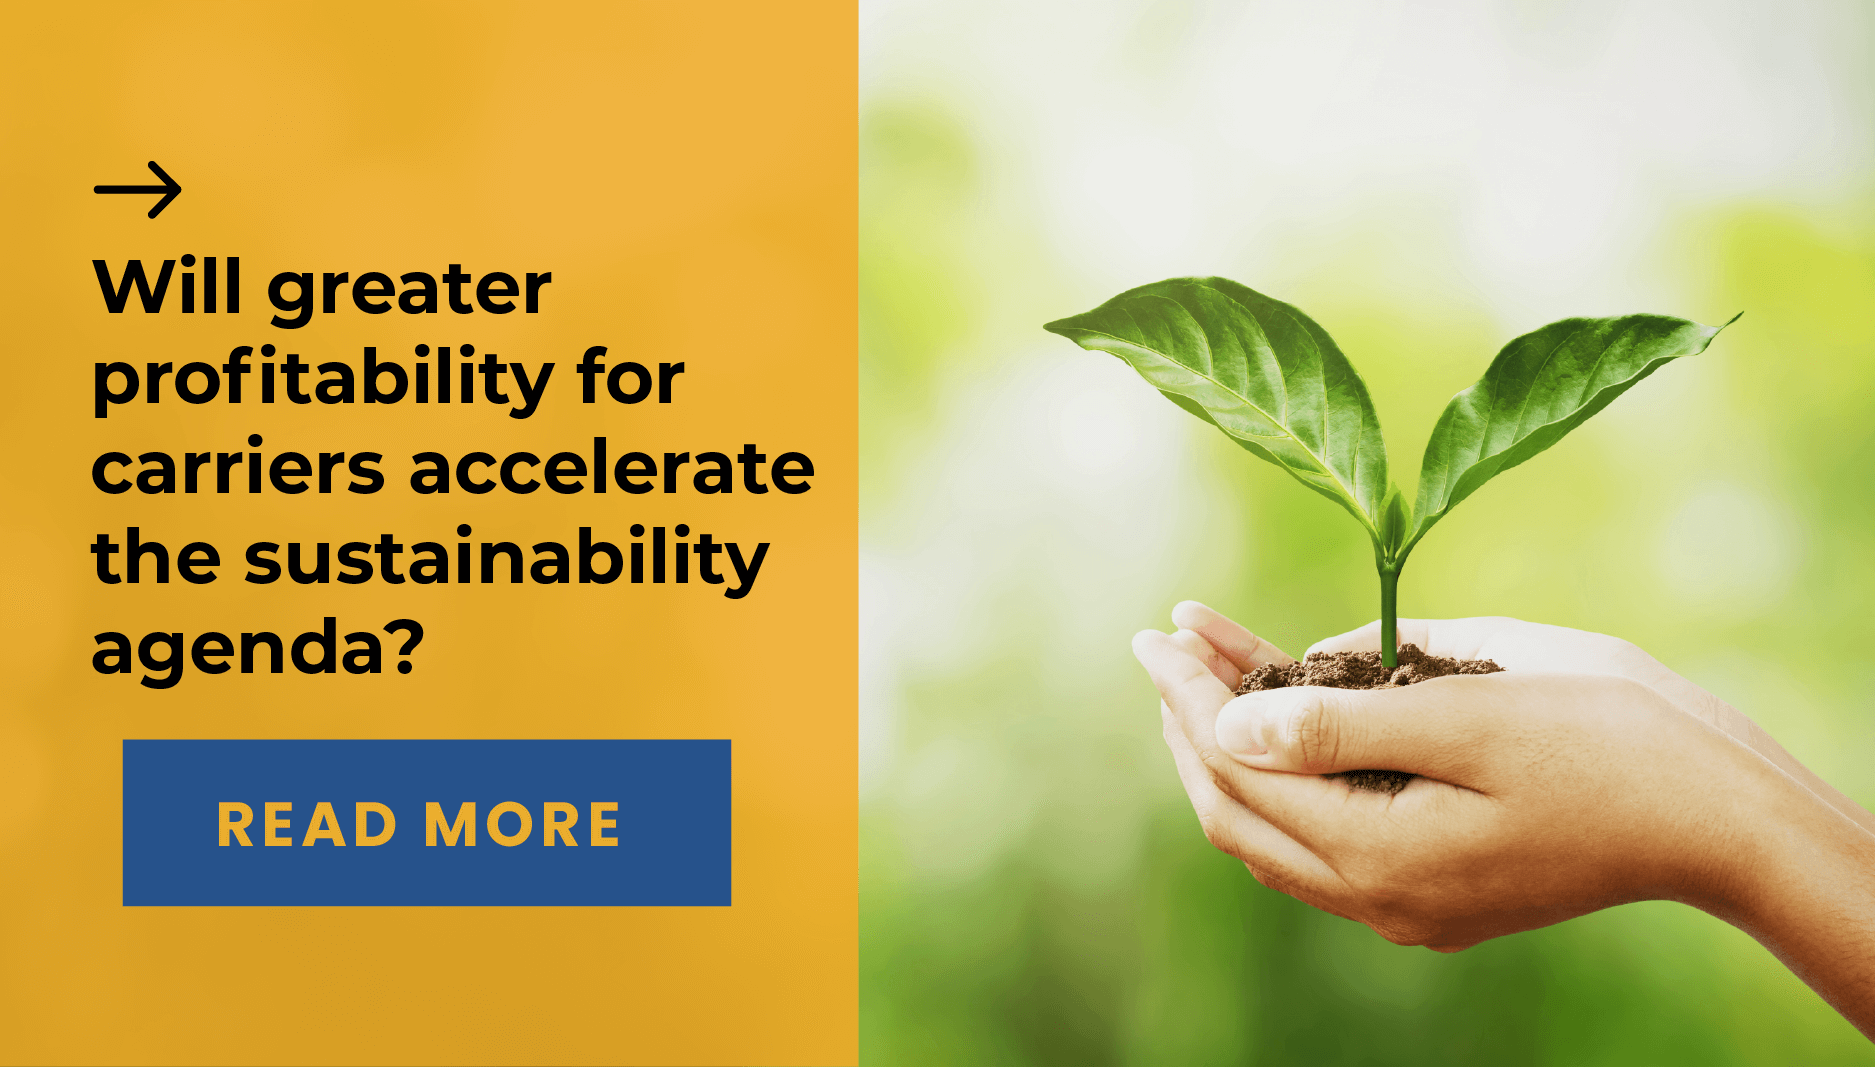 Will greater profitability for carriers accelerate the sustainability agenda?